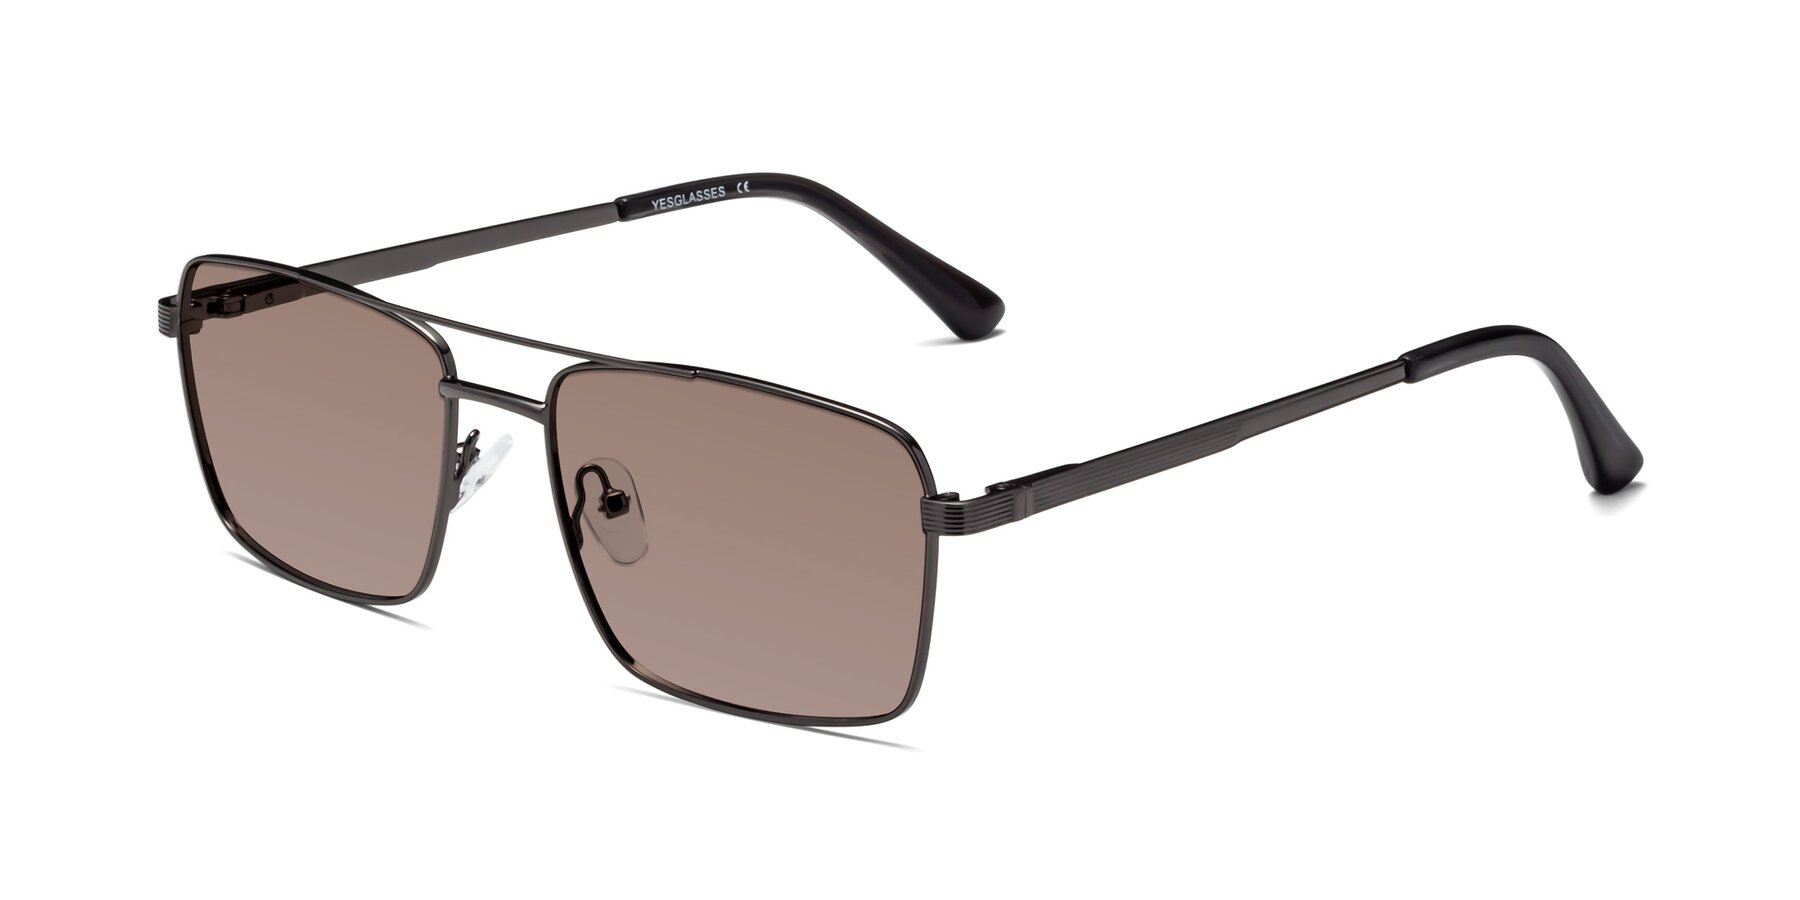 Angle of Beckum in Gunmetal with Medium Brown Tinted Lenses